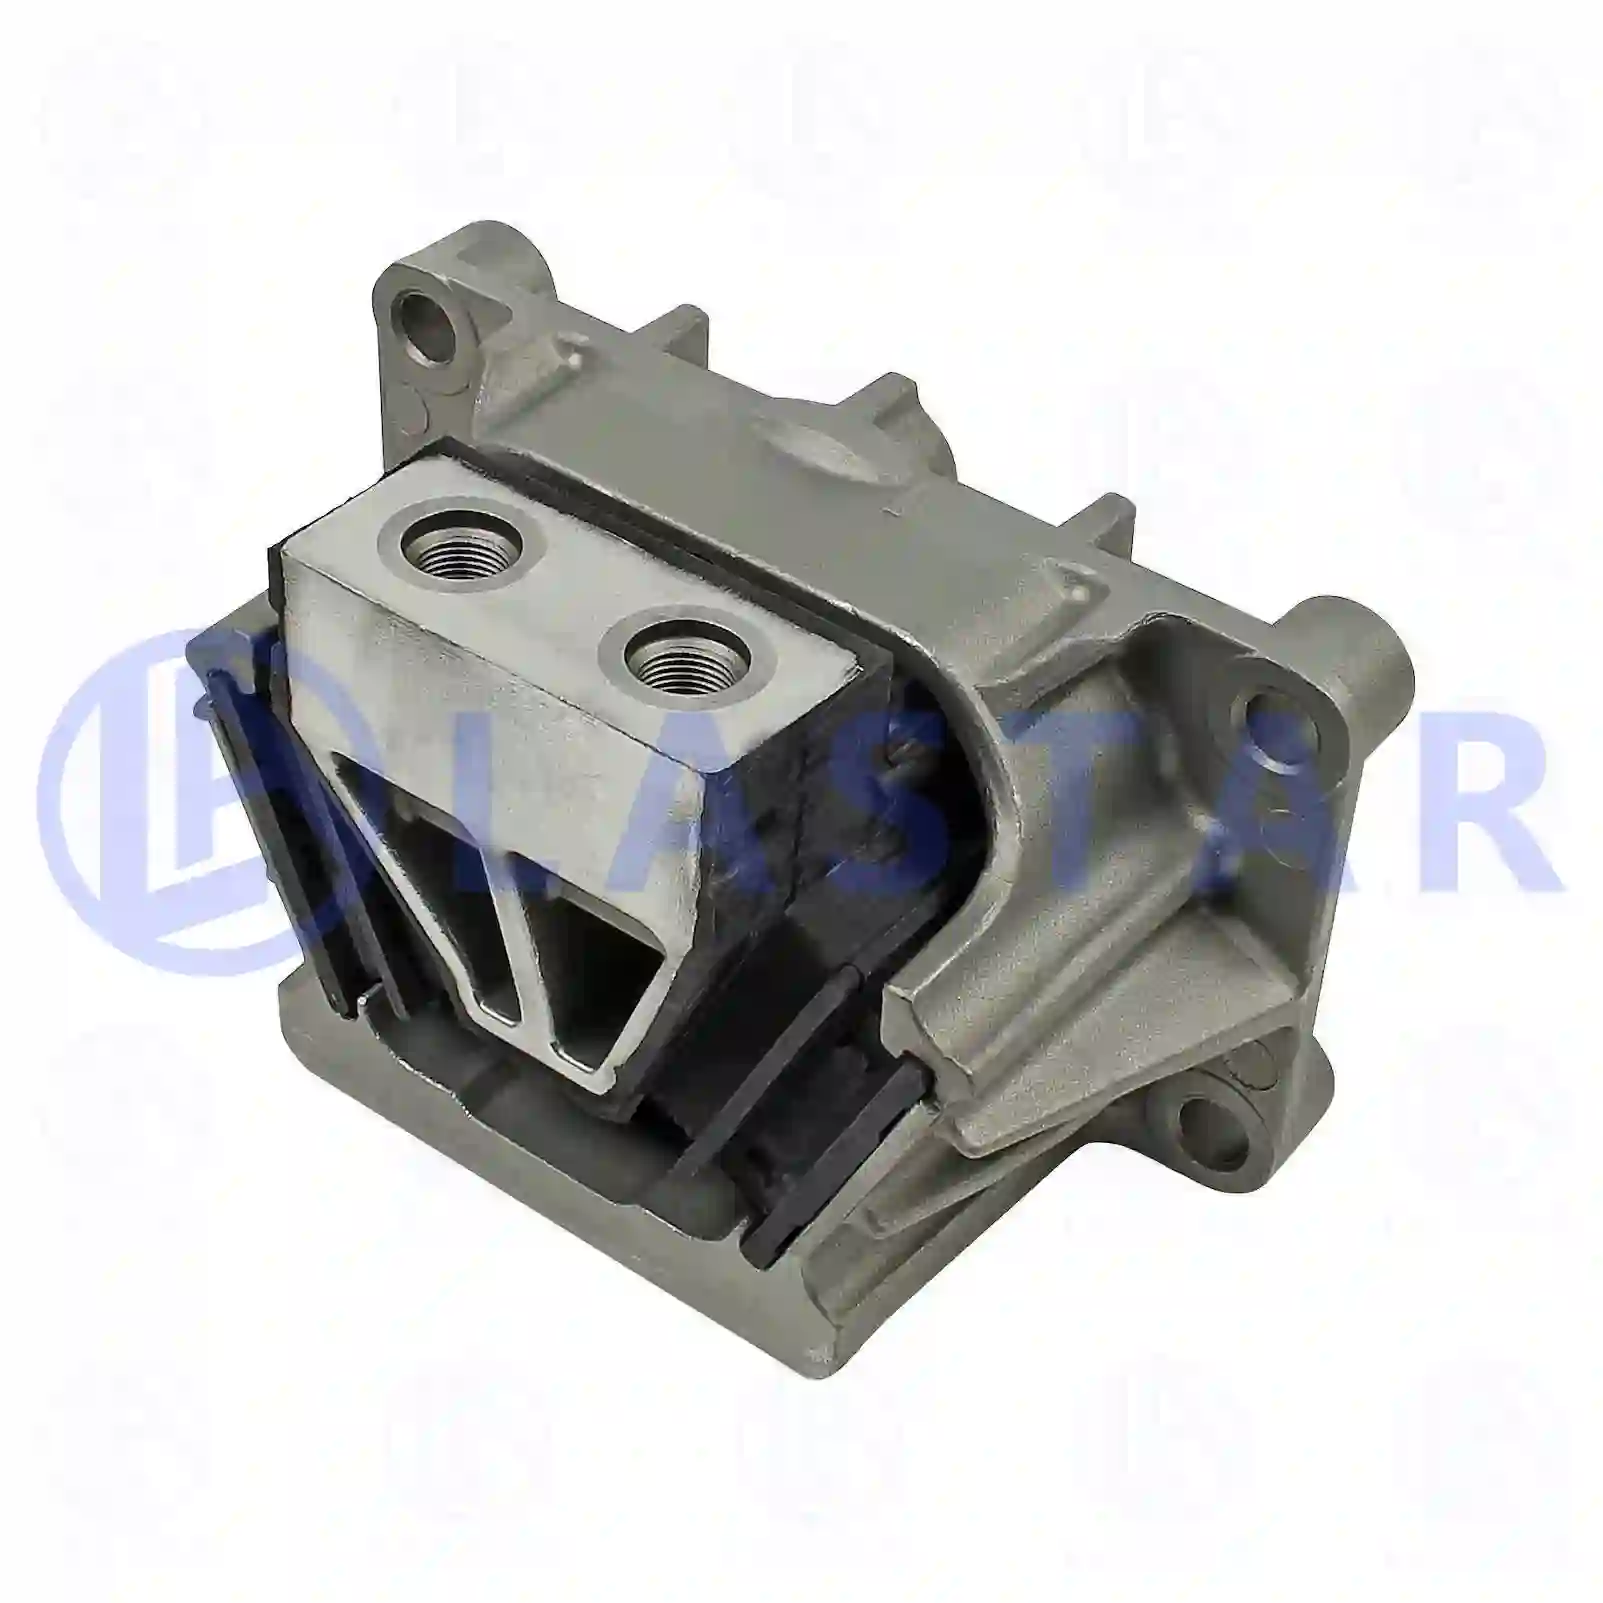 Engine mounting, 77702398, 9412411513, 9412414513, 9412415513, 9412417513, ||  77702398 Lastar Spare Part | Truck Spare Parts, Auotomotive Spare Parts Engine mounting, 77702398, 9412411513, 9412414513, 9412415513, 9412417513, ||  77702398 Lastar Spare Part | Truck Spare Parts, Auotomotive Spare Parts